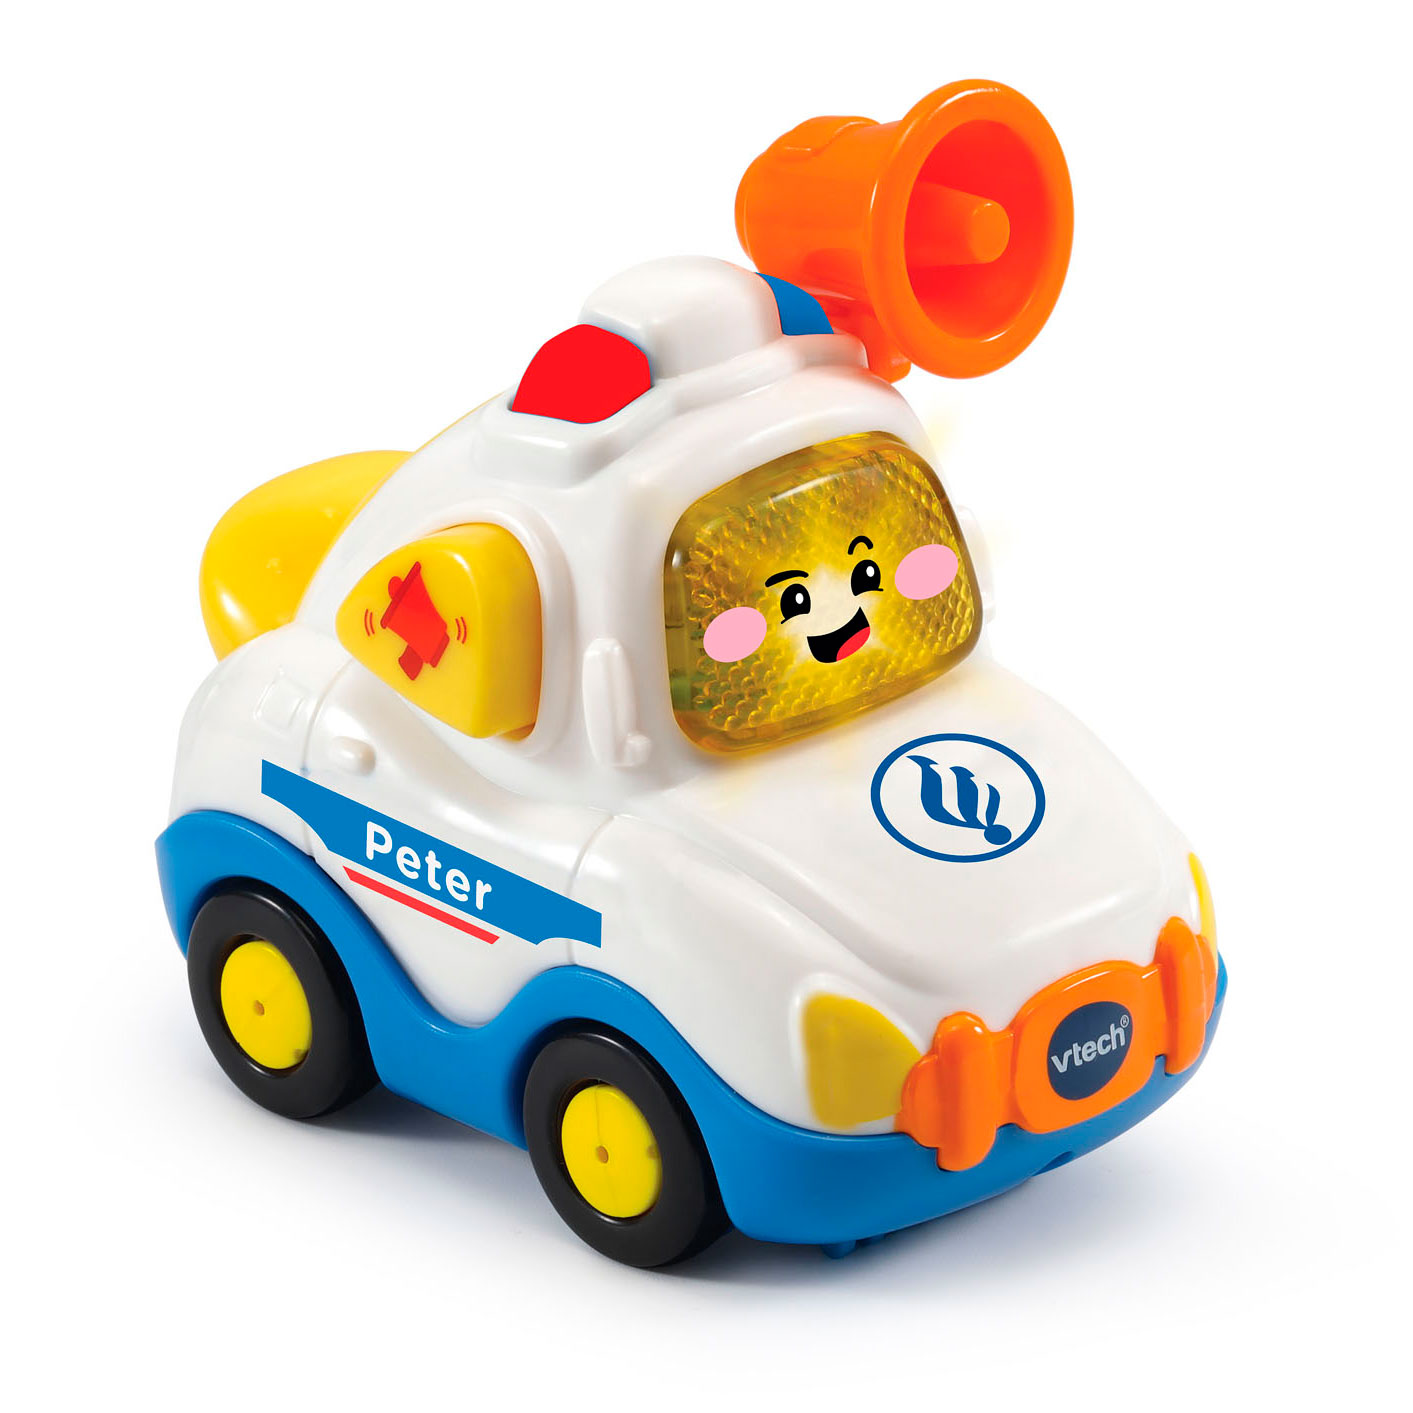 activering Gebeurt Soeverein VTech Toet Toet Cars - Peter Police | Thimble Toys